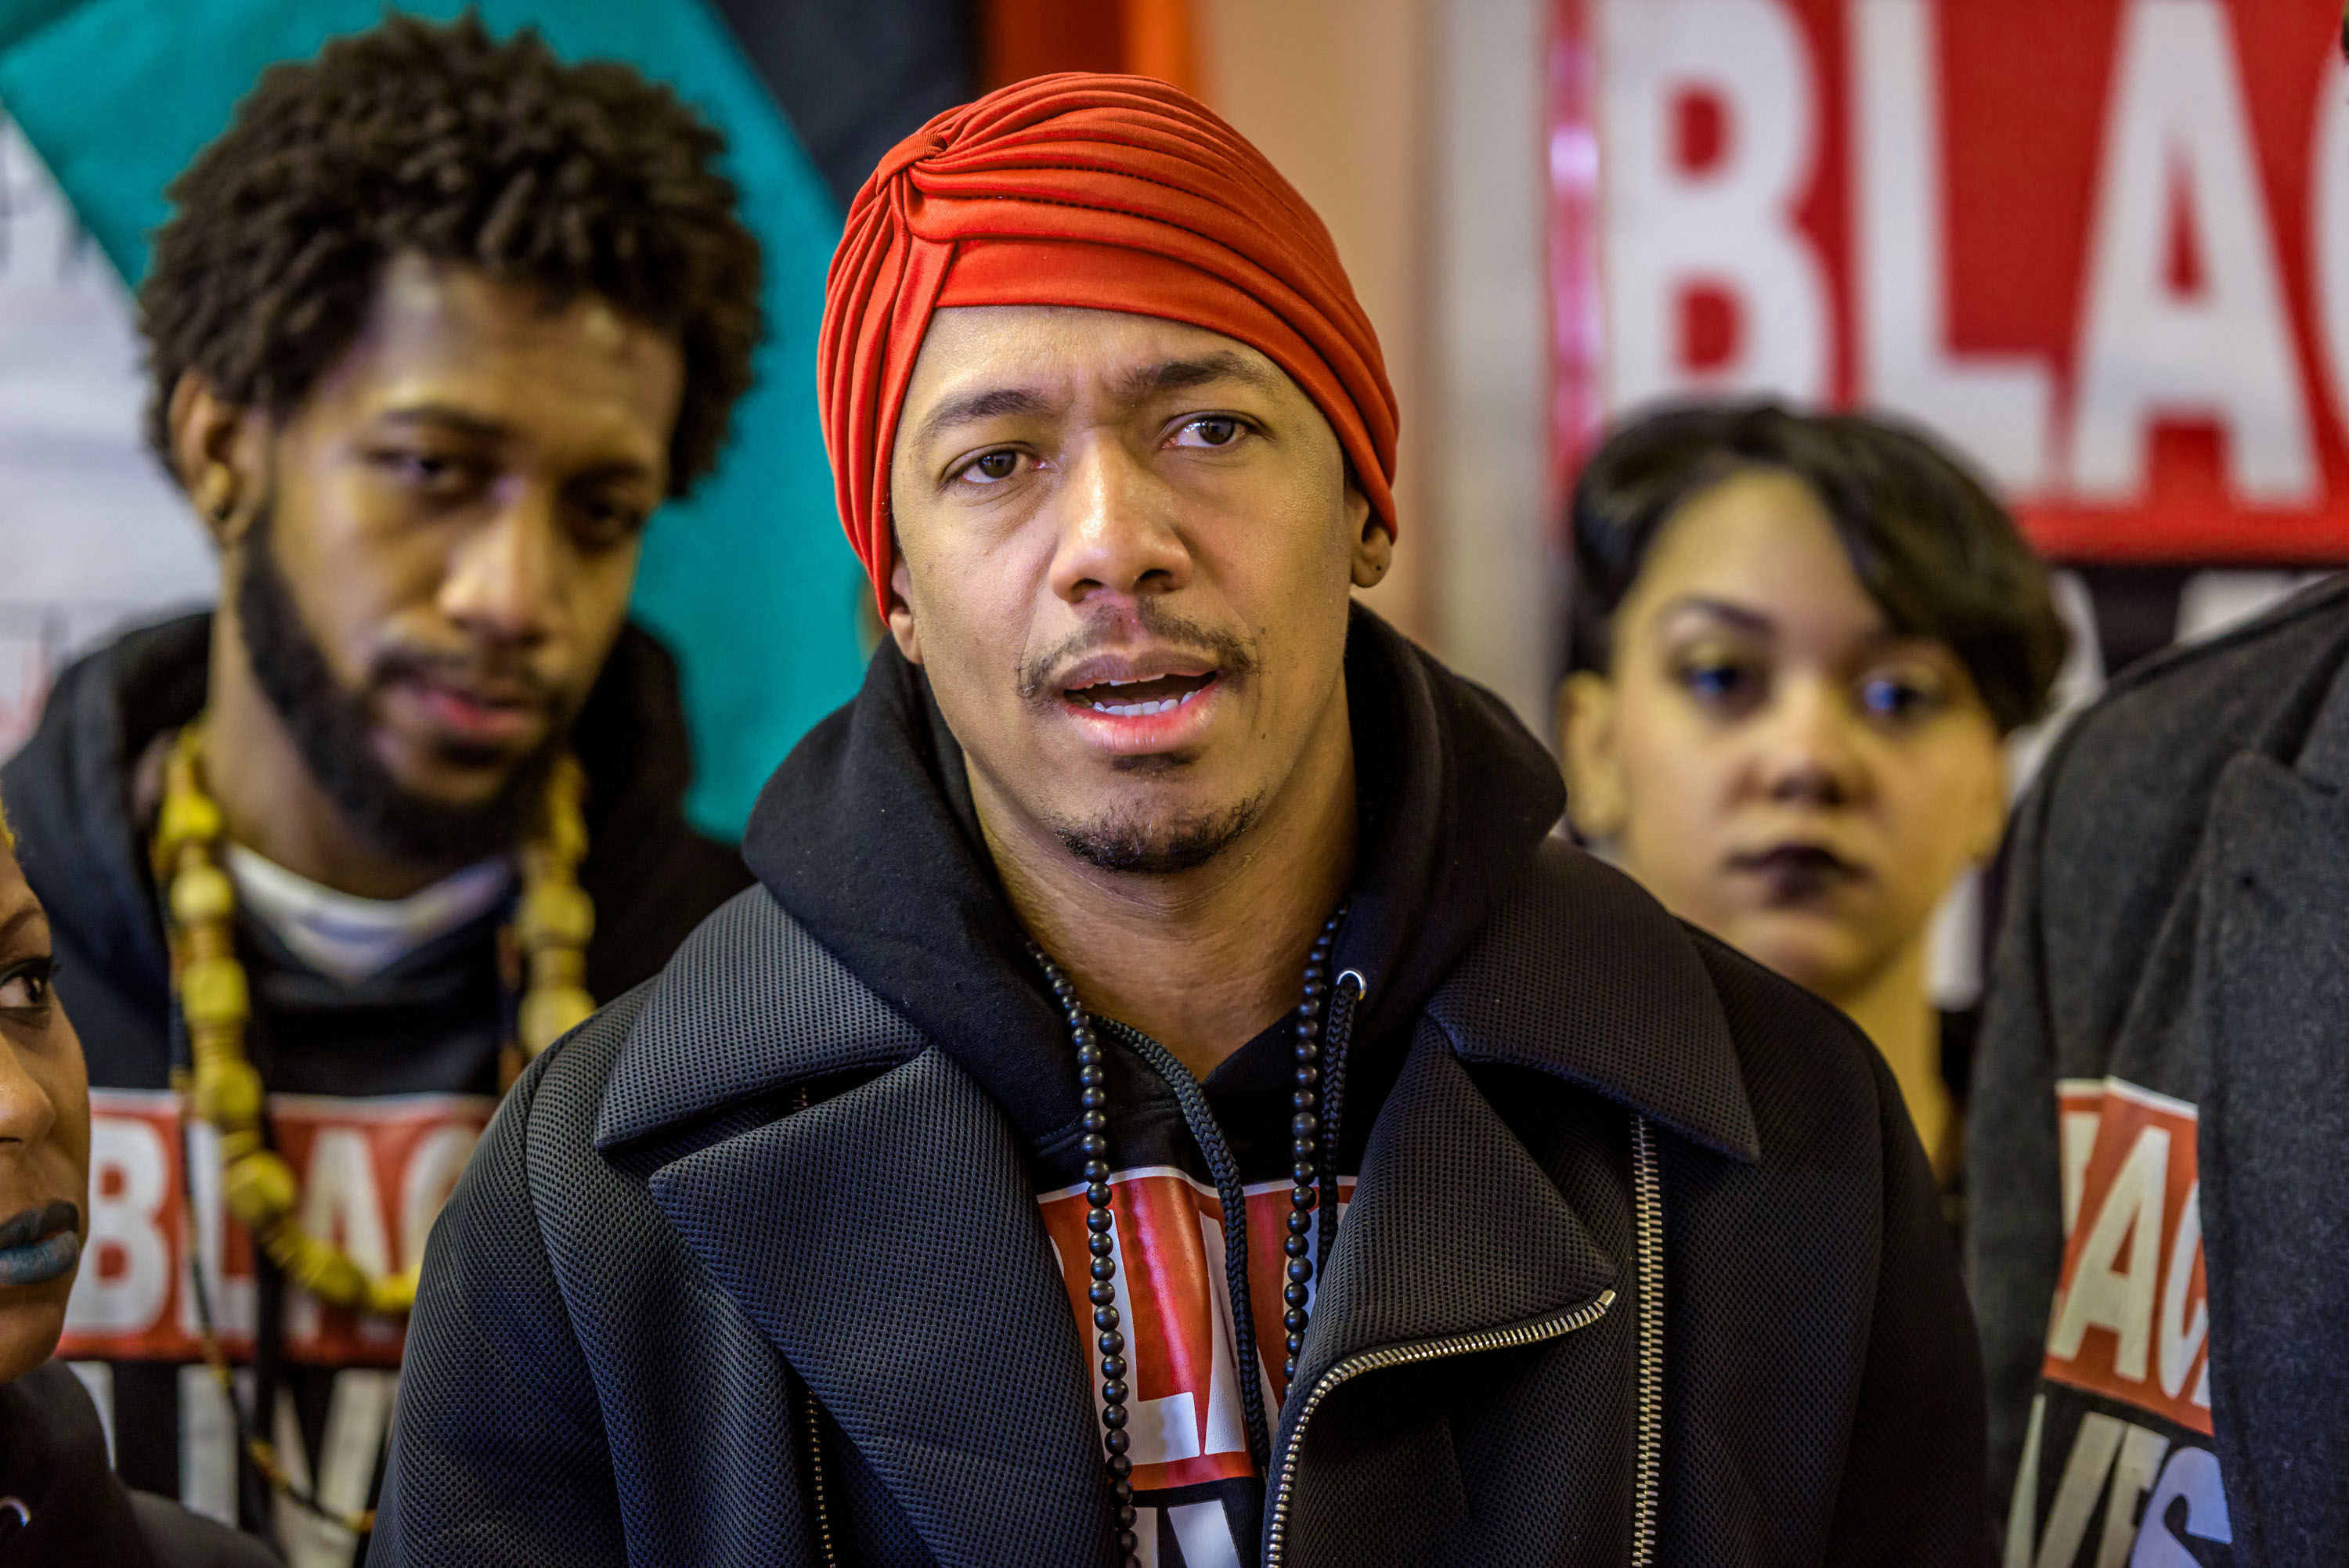 Nick Cannon And 16 Other1 -Nick Cannon And 16 Other Famous People Who Have A Bunch Of Children